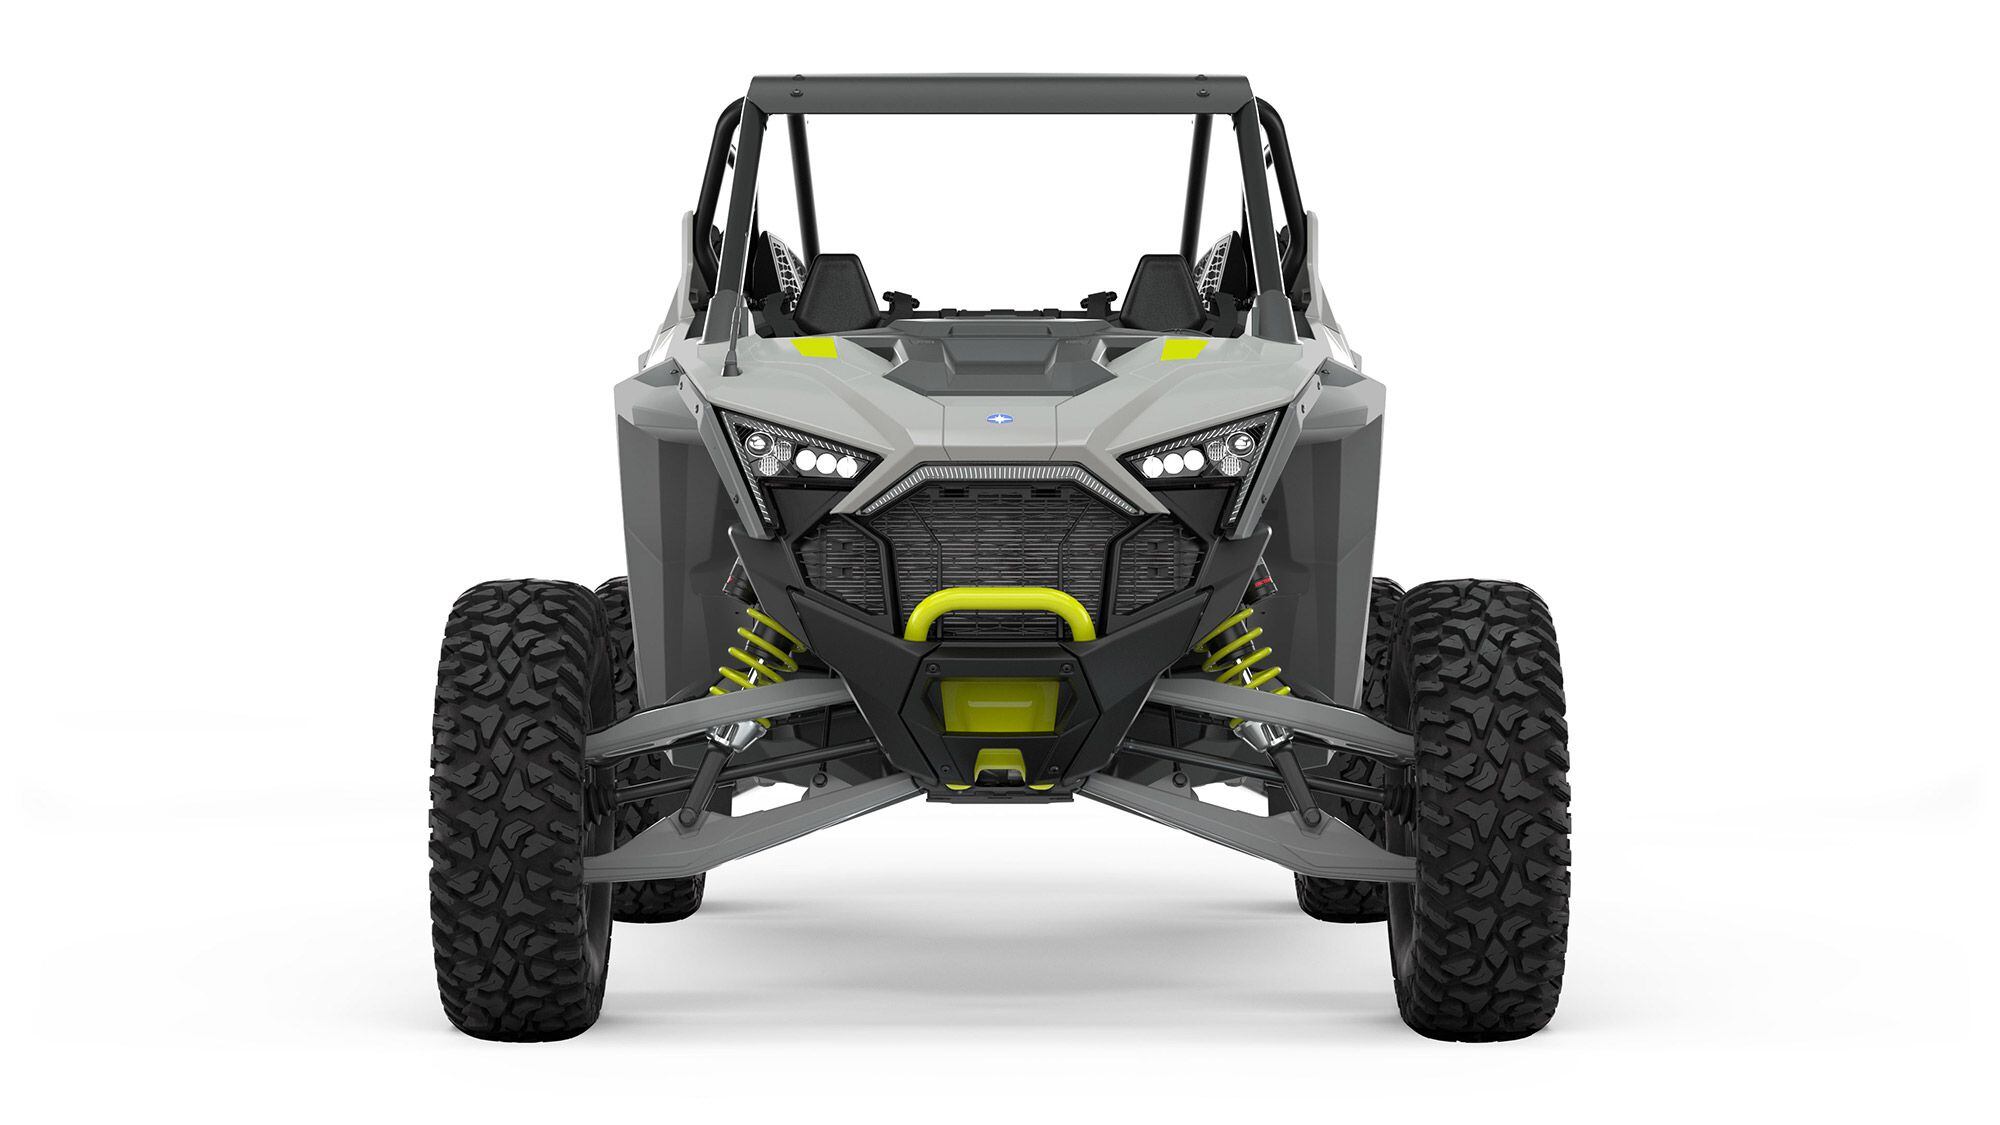 2022 Polaris RZR Turbo R Ultimate front view in Ghost Gray.